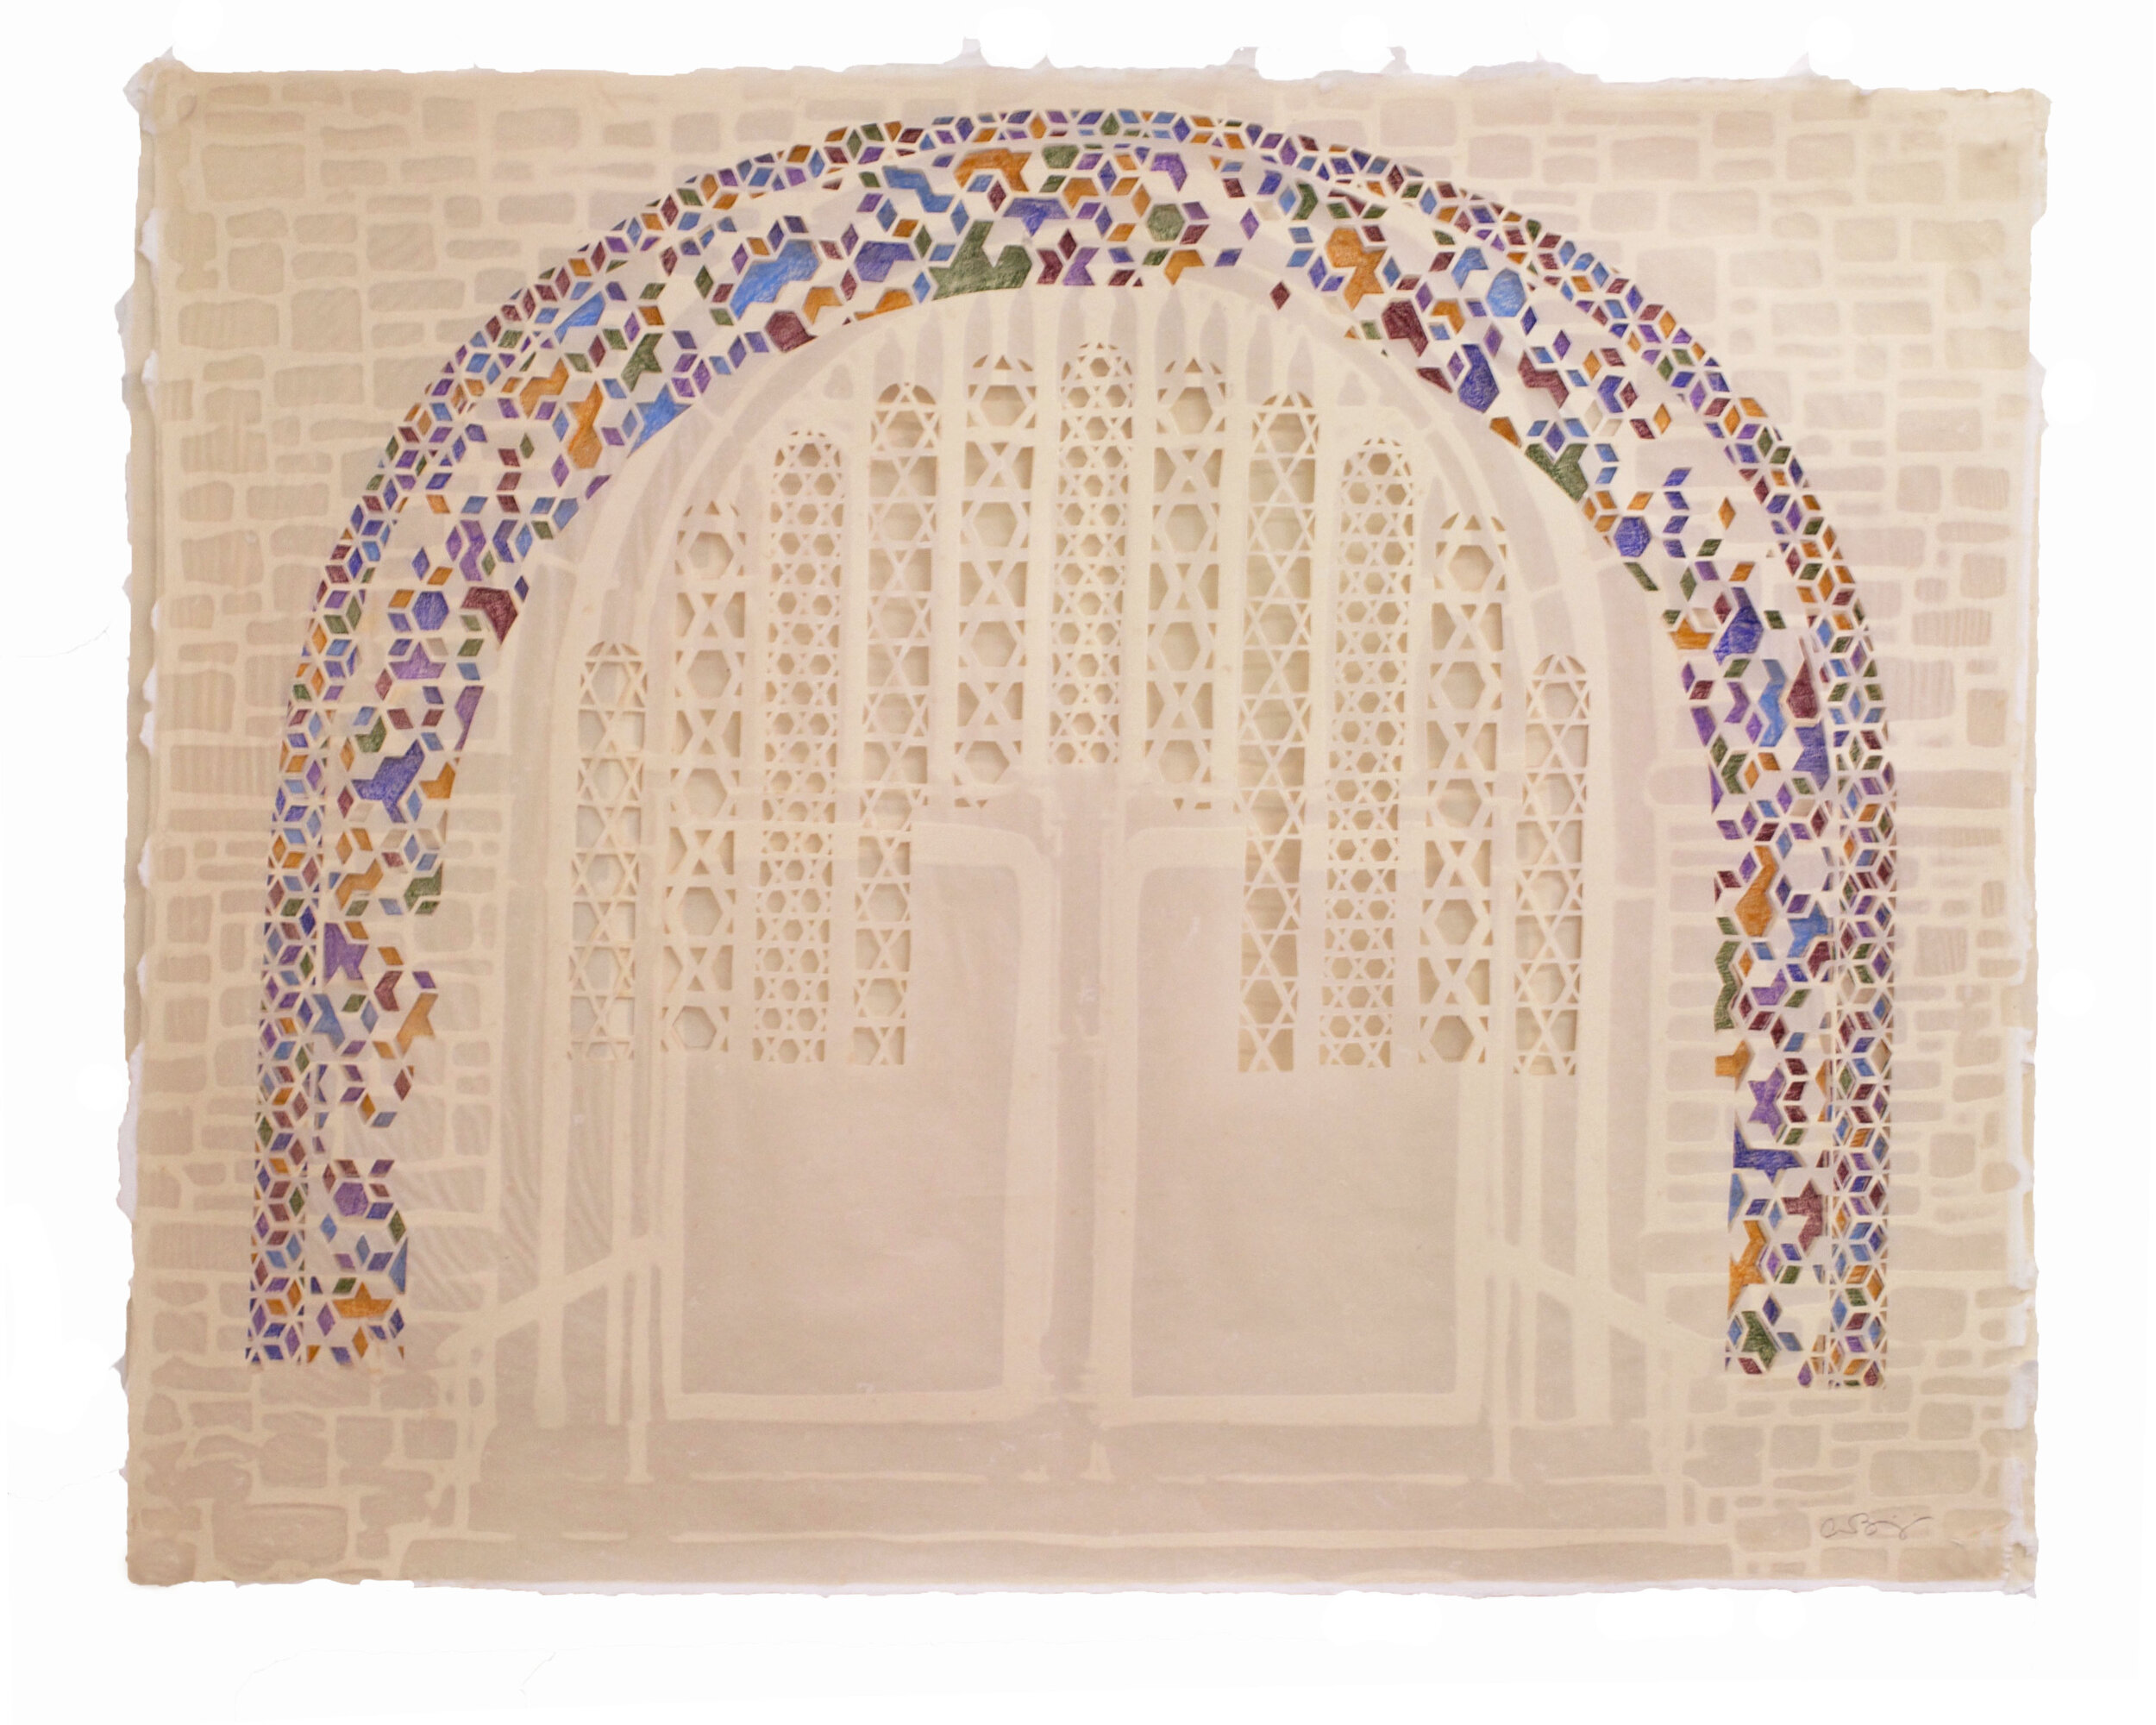  Anna Hendrick Karpatkin Benjamin,  Stephen Wise Free Synagogue  (cut and color), 2018, Cotton blowout on abaca sheet, hand cut and colored pencil, 17 x 21 inches.  